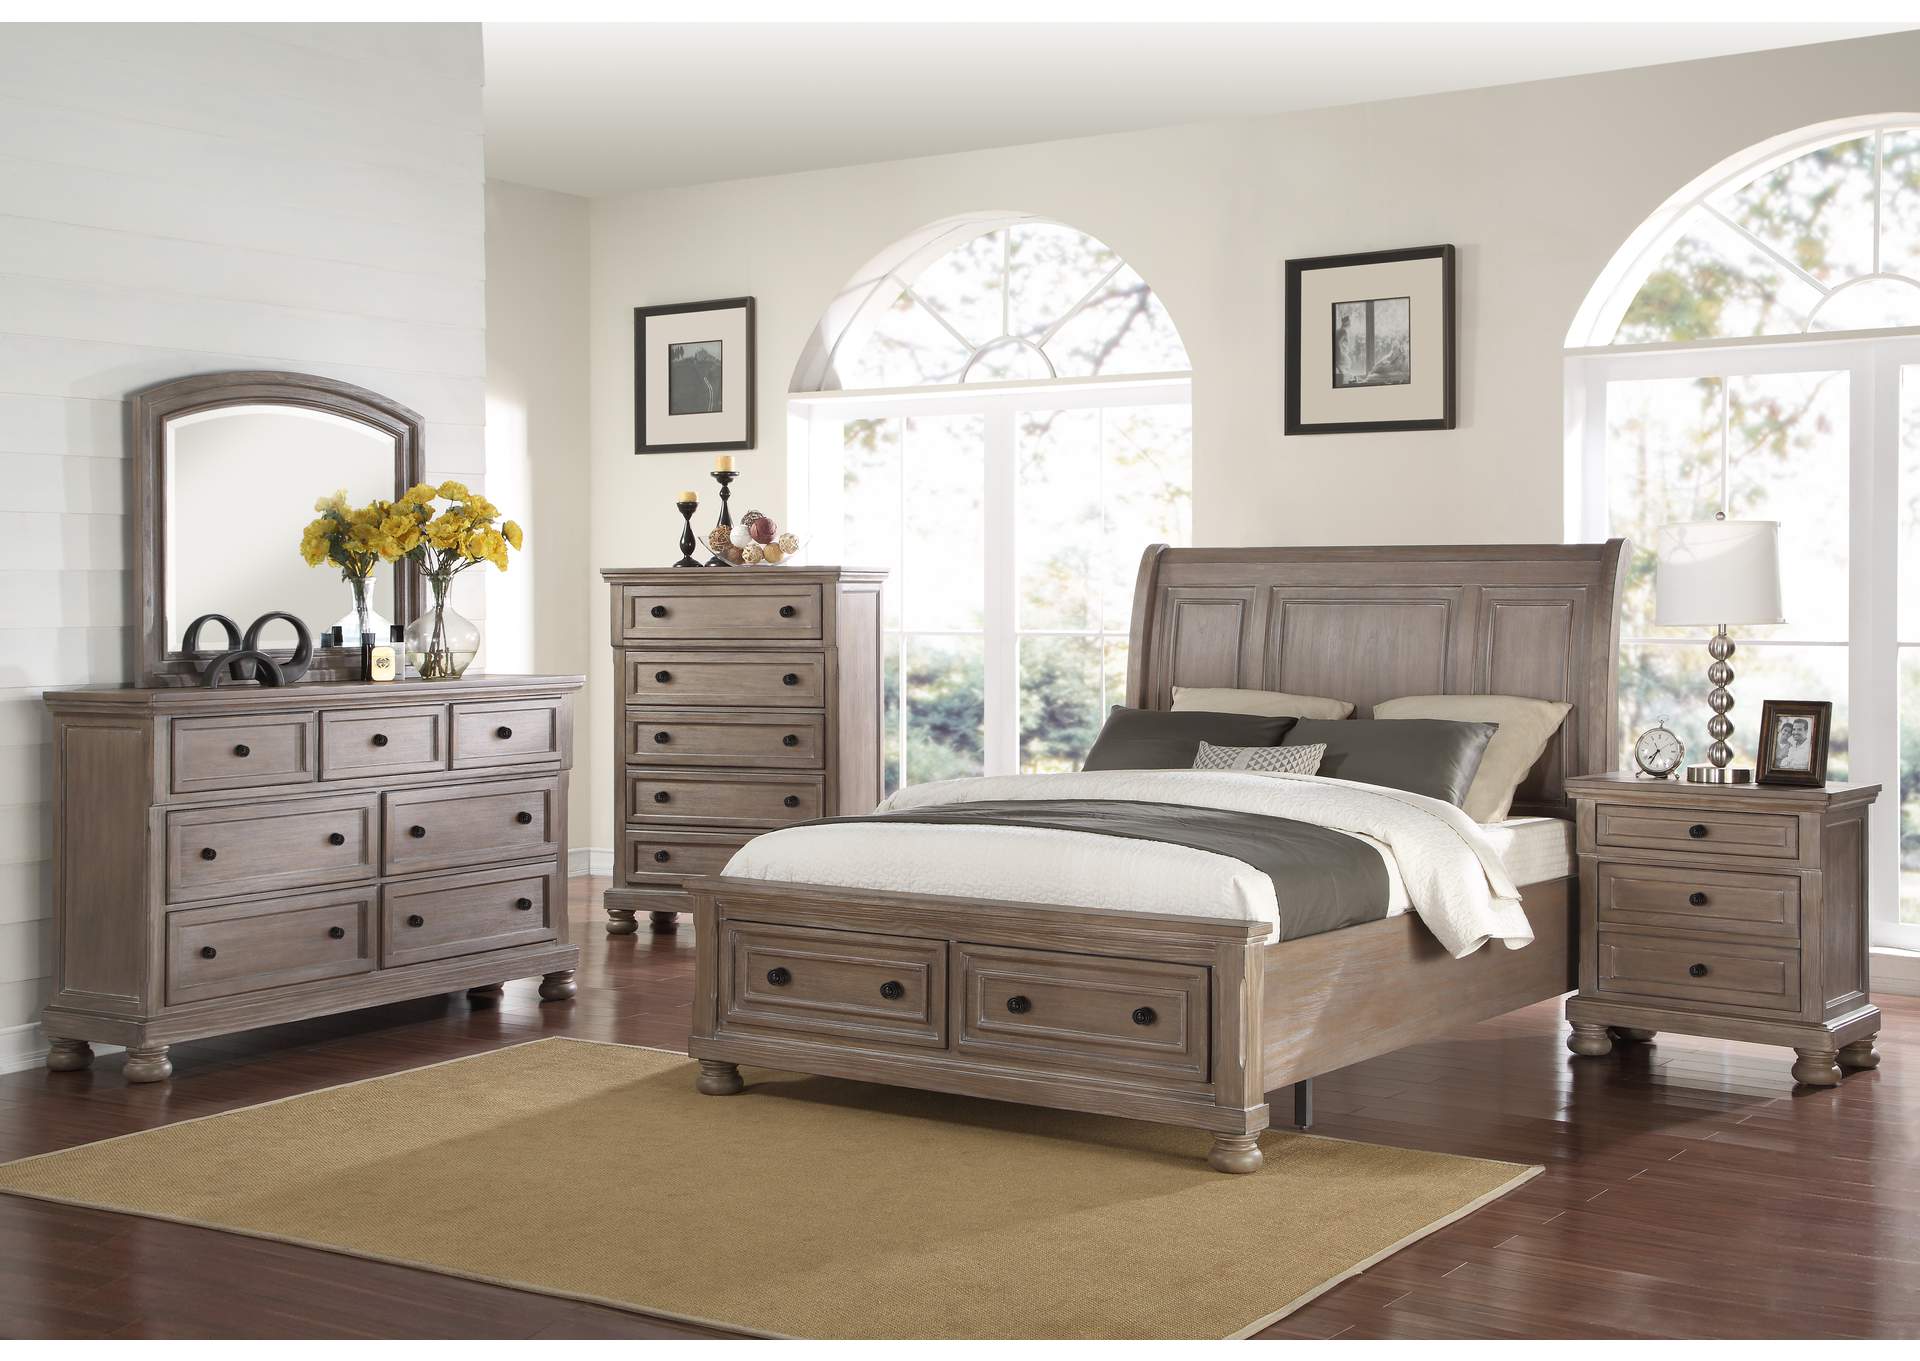 Allegra Pewter California King Storage Bed w/Dresser And Mirror,New Classic